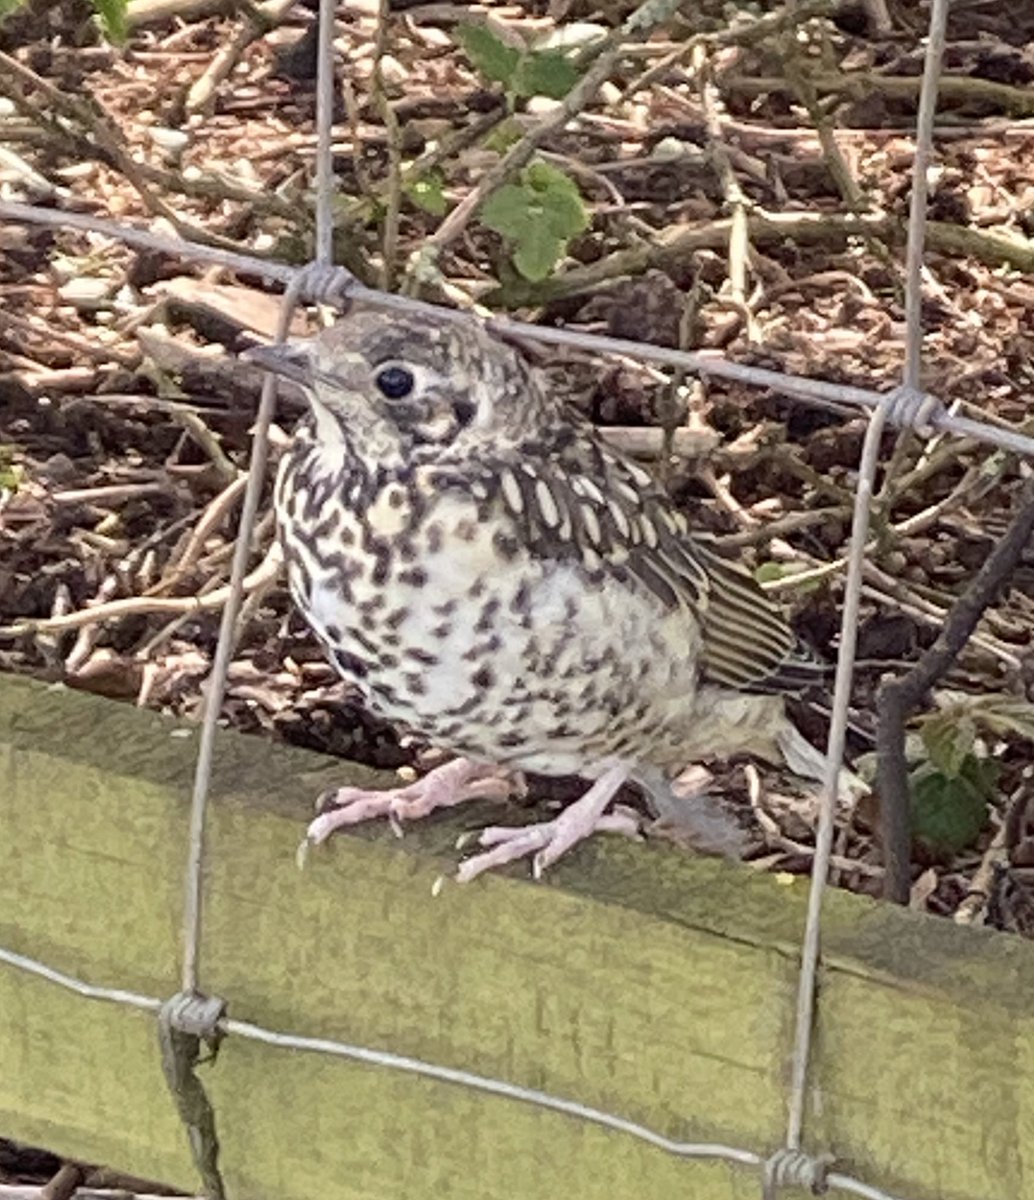 This baby thrush is watching me but it’s mum is telling us both off, me for being to close and it for not following her.